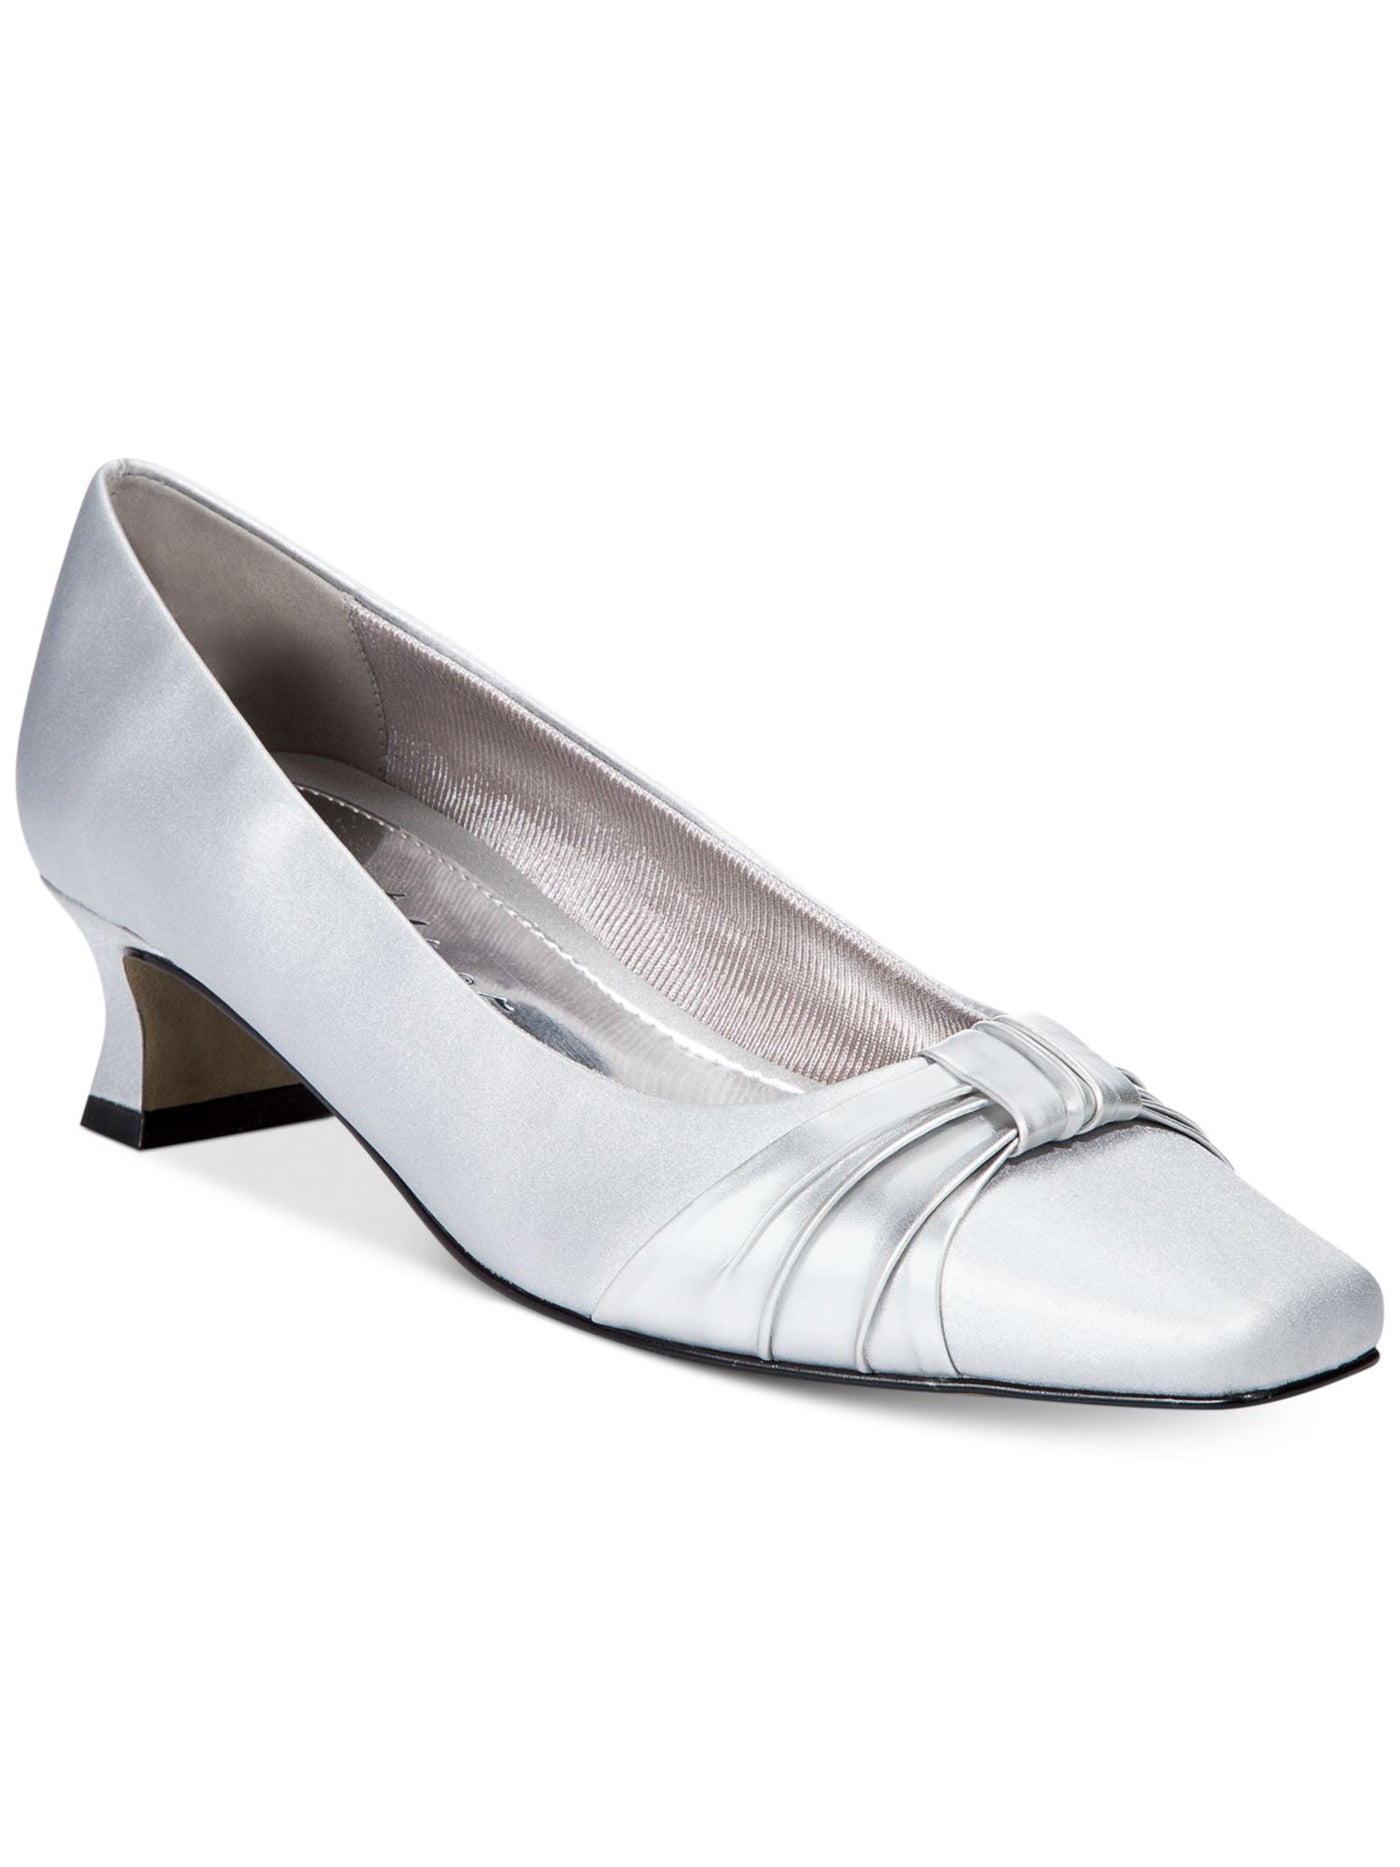 EASY STREET ALIVE AT 5 Womens Silver Bow Inspired D Cushioned Waive Square Toe Sculpted Heel Slip On Dress Pumps Shoes 10 M